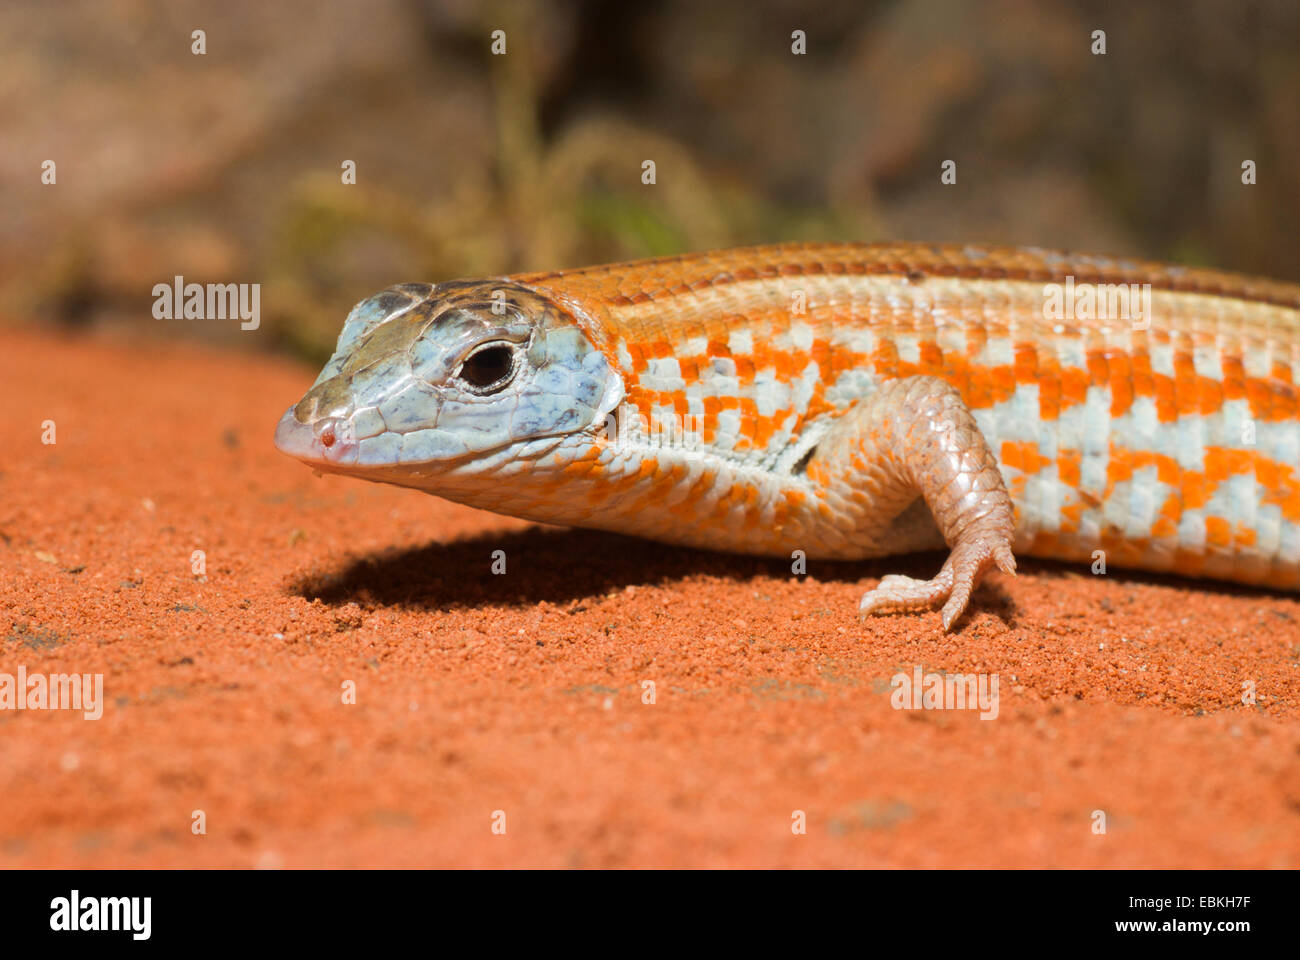 Malagasy plated lizard (Tracheloptychus petersi), on the sandy ground Stock Photo